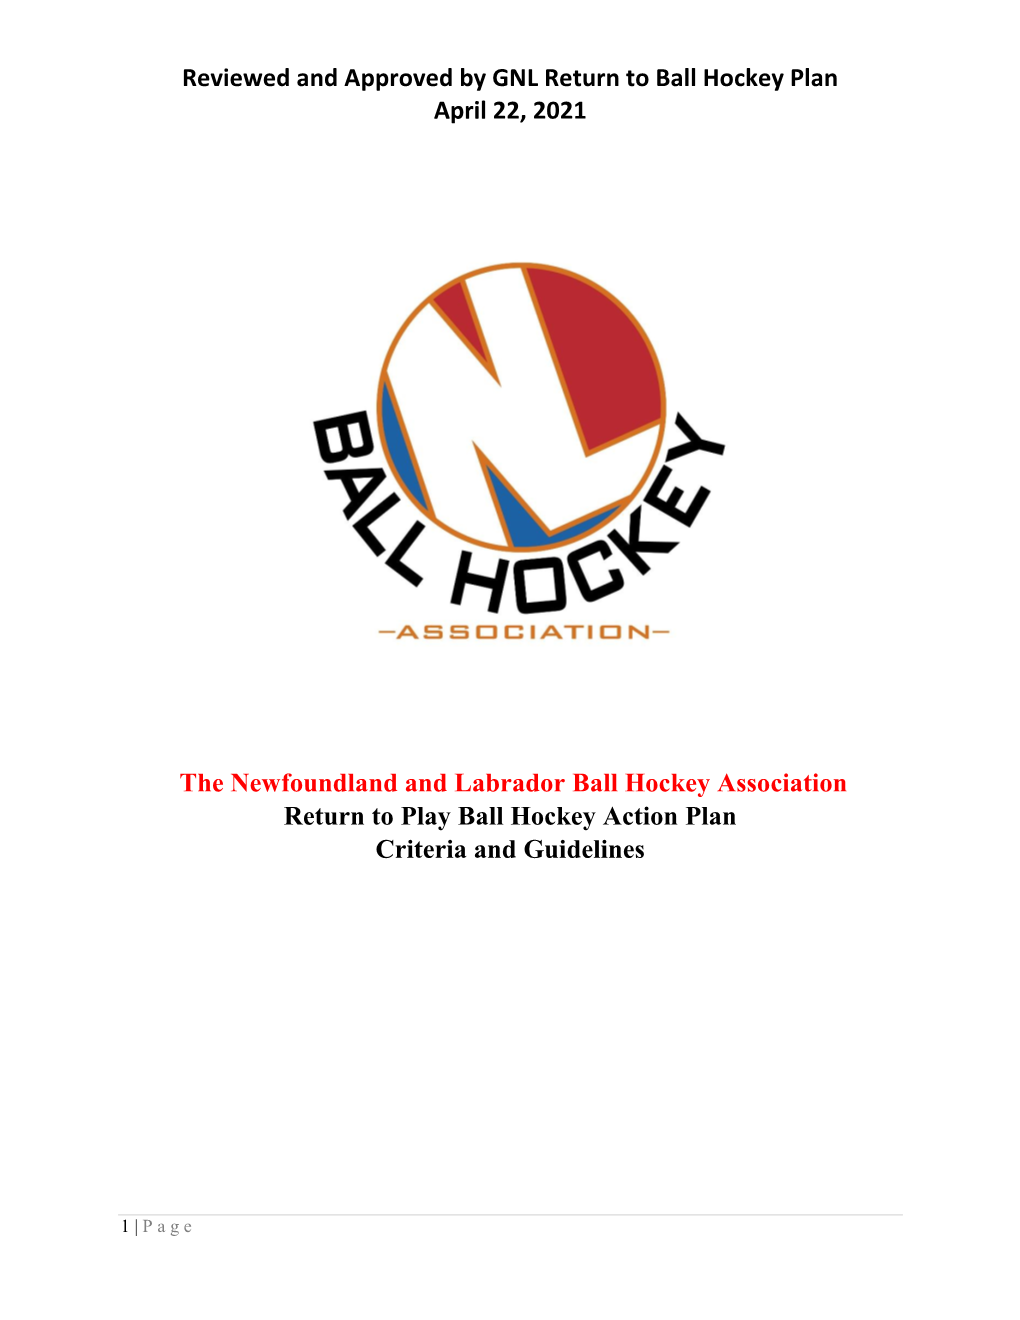 Reviewed and Approved by GNL Return to Ball Hockey Plan April 22, 2021 the Newfoundland and Labrador Ball Hockey Association R